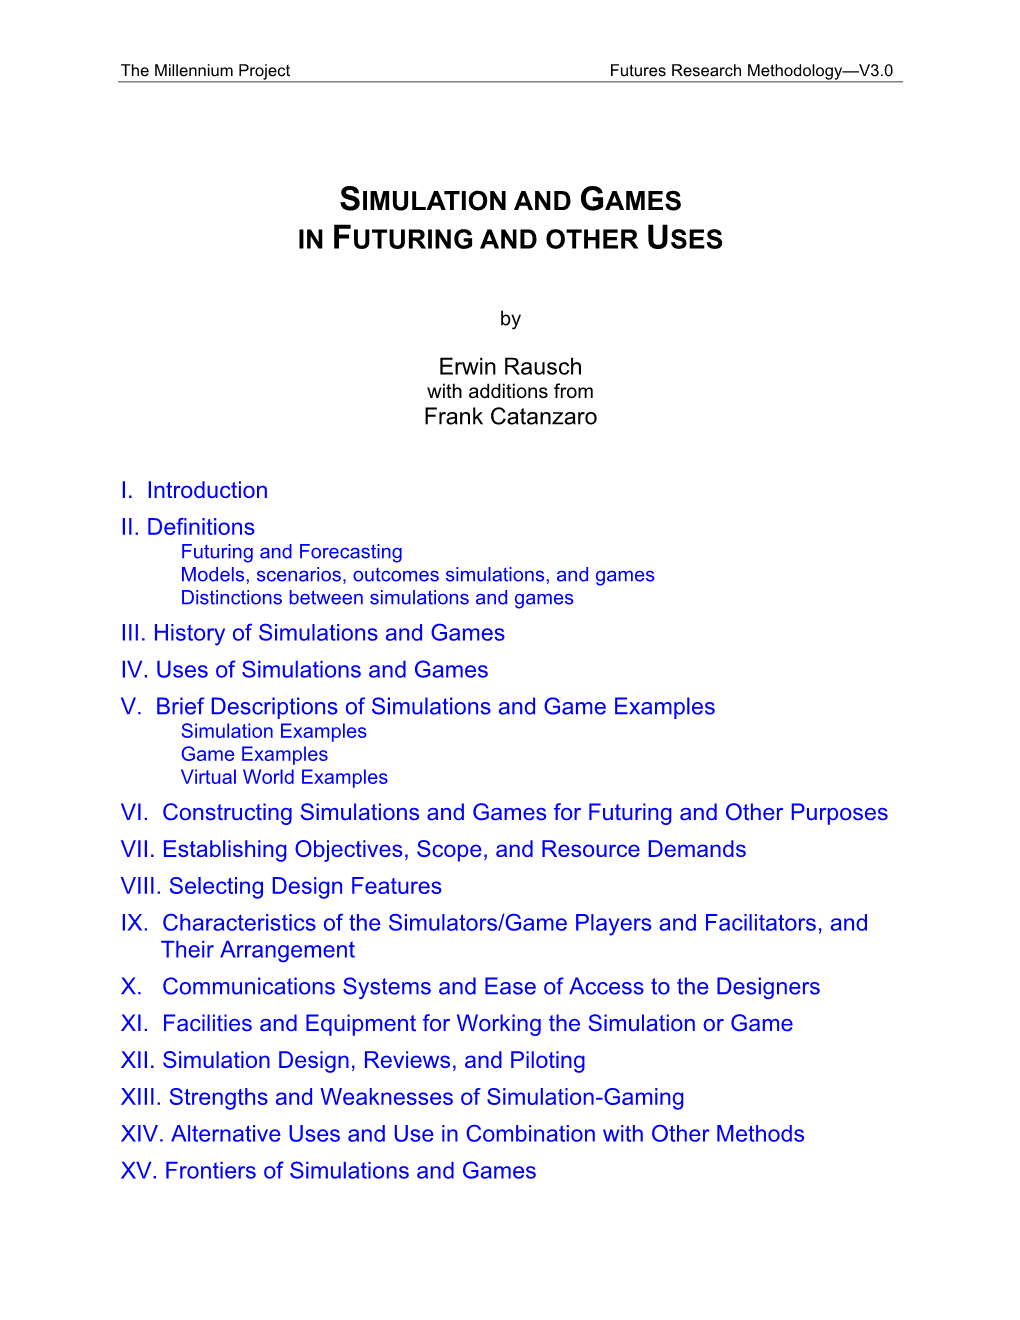 Simulation and Games in Futuring and Other Uses